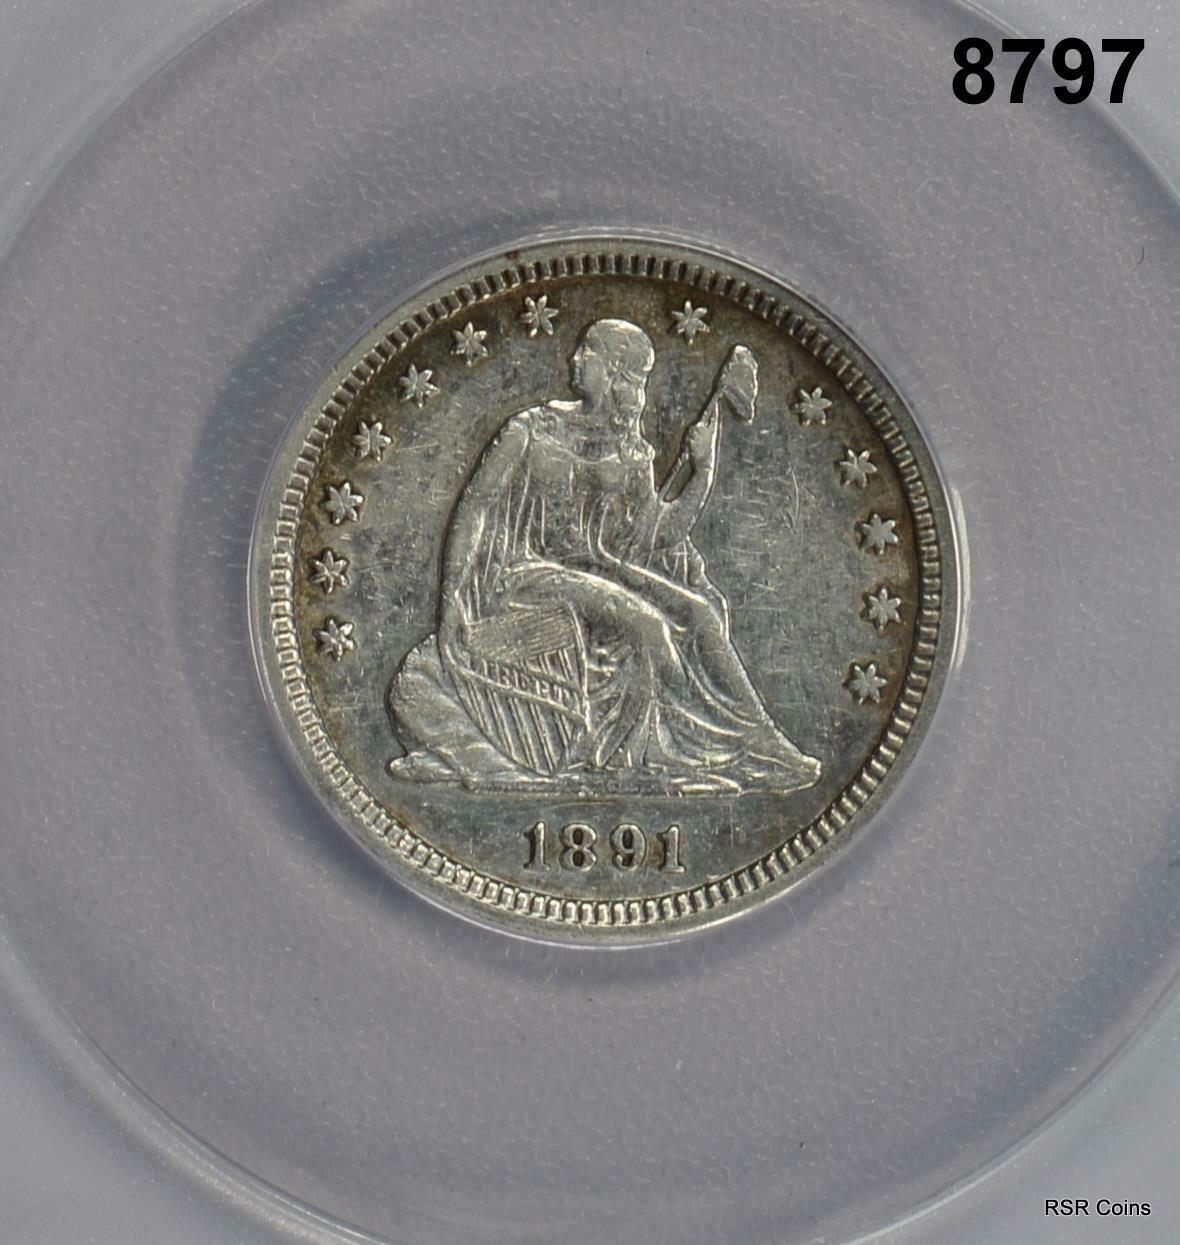 1891 S SEATED QUARTER ANACS CERTIFIED EF45 CLEANED NICE! #8797